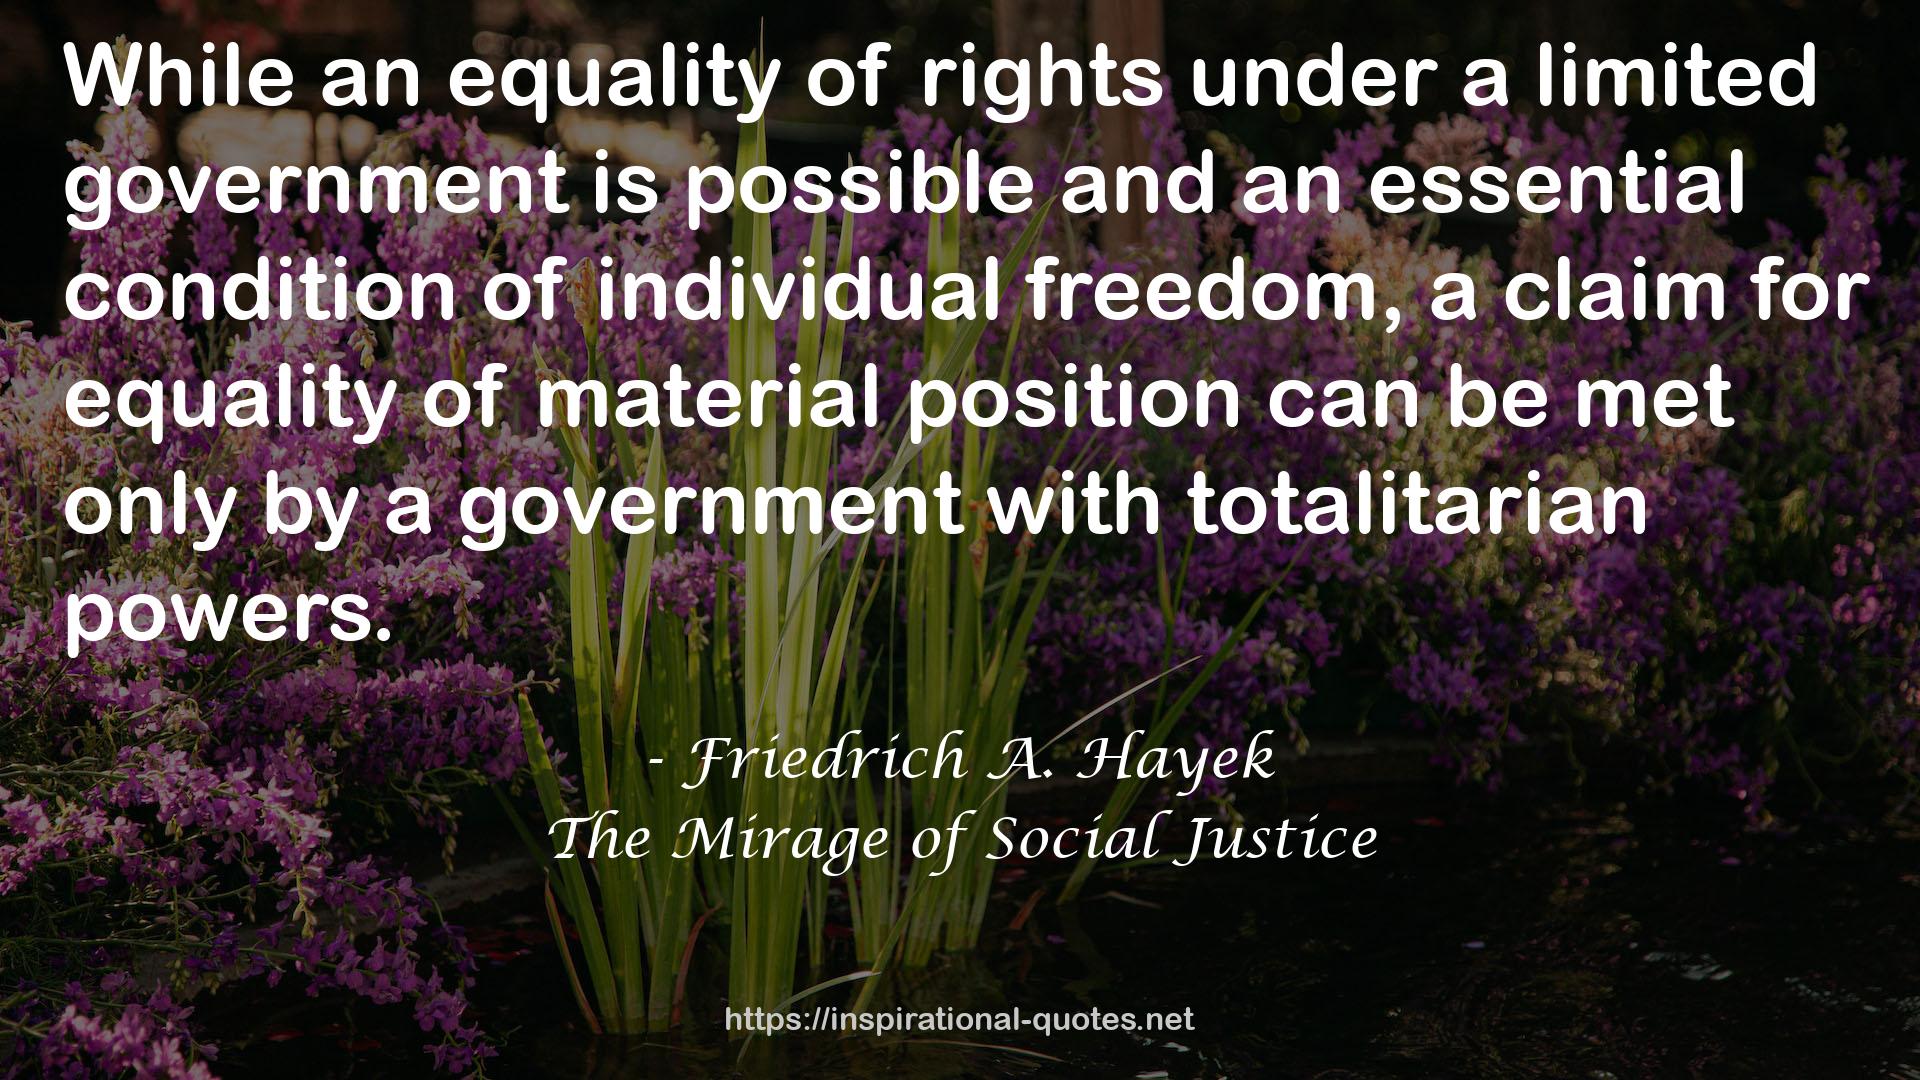 The Mirage of Social Justice QUOTES